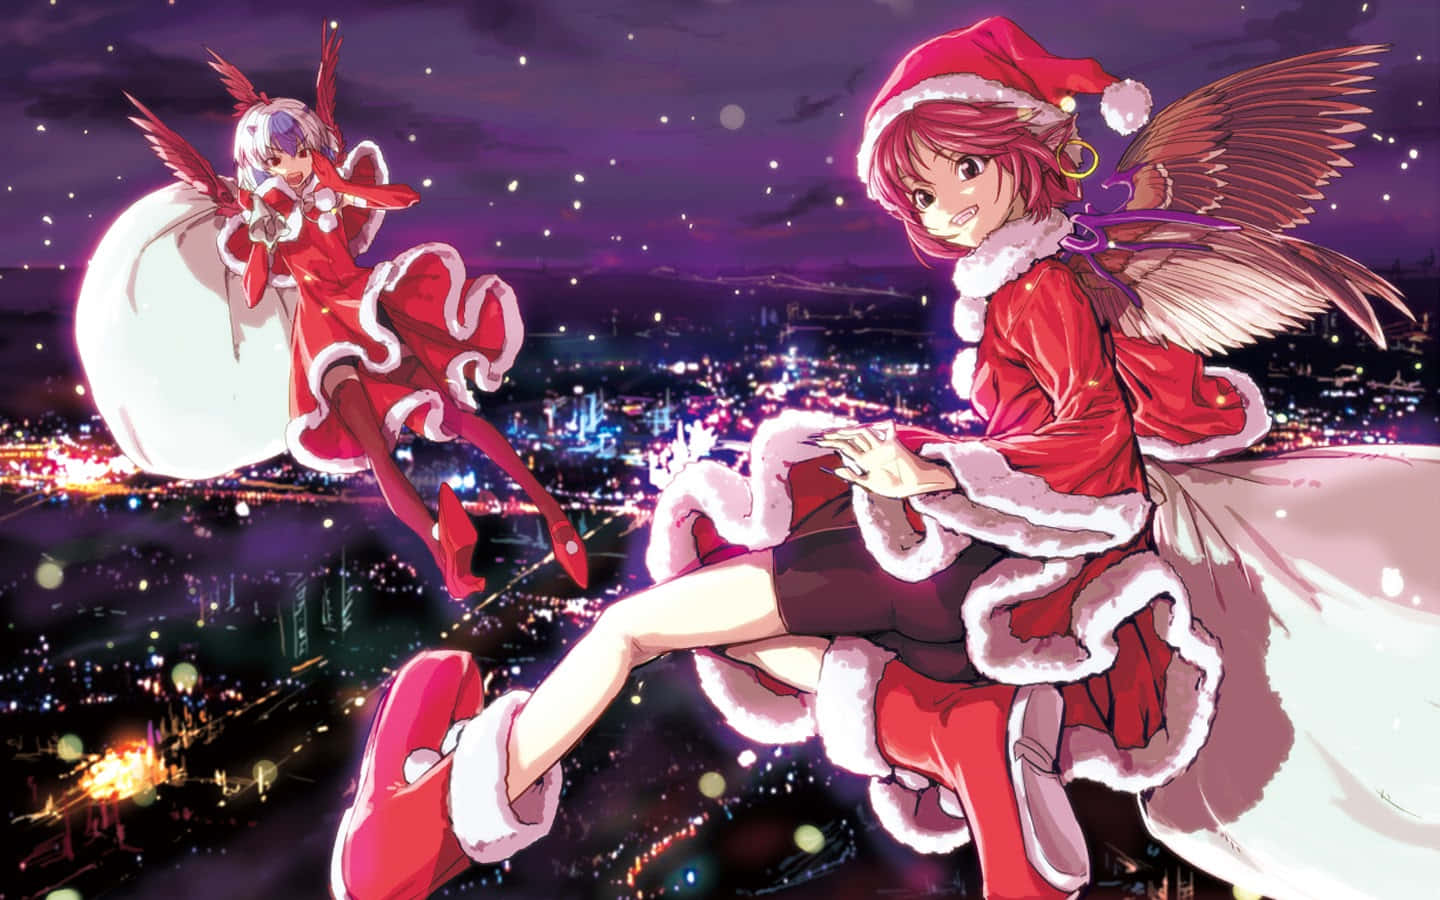 Celebrate the Holidays with Anime Christmas!